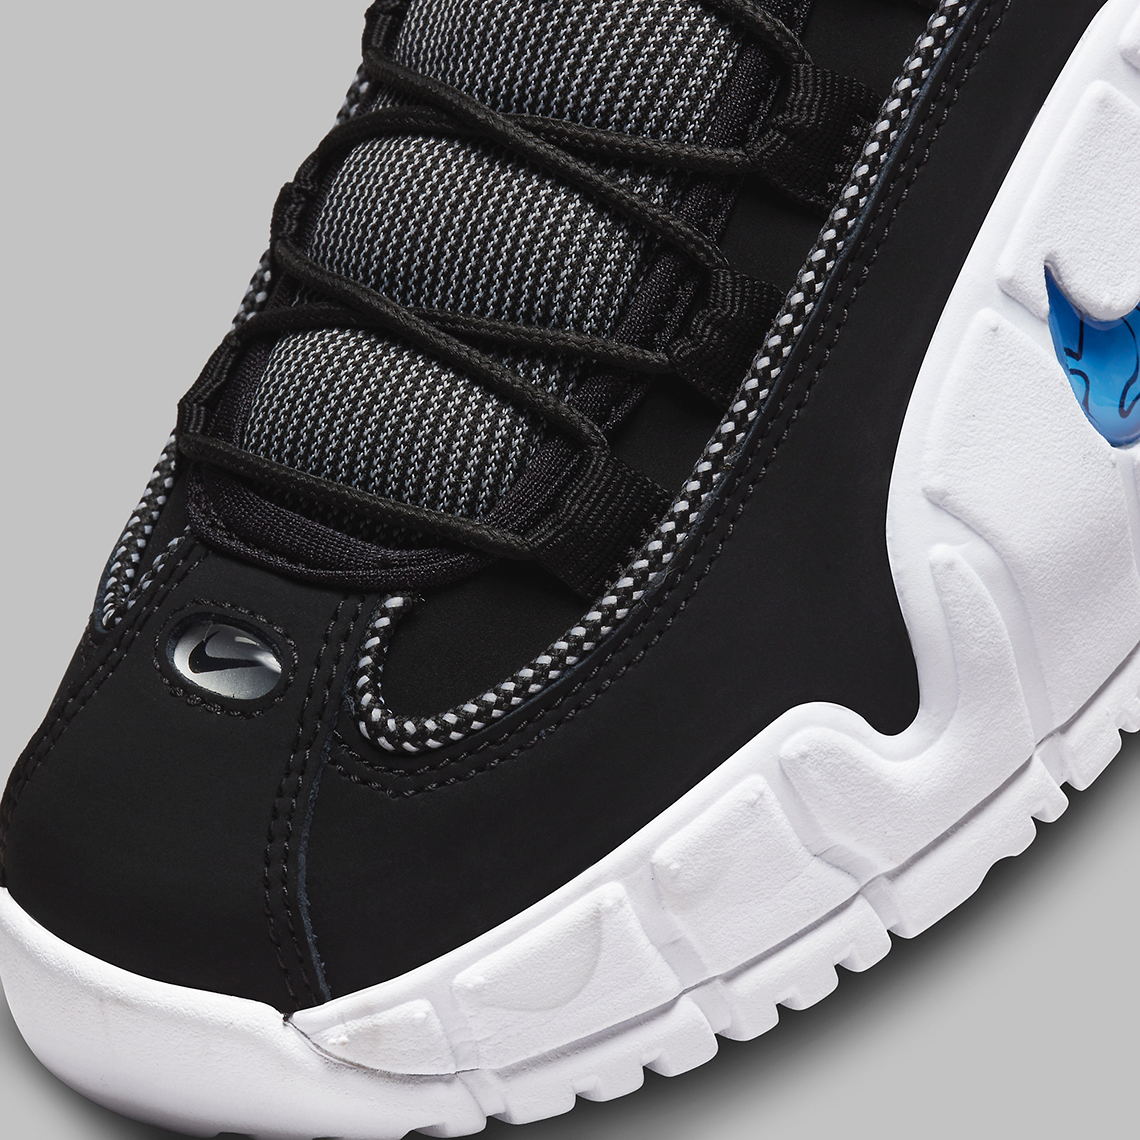 The Nike Air Max Penny 1 Retro To Release In GS Sizes - SneakerNews.com